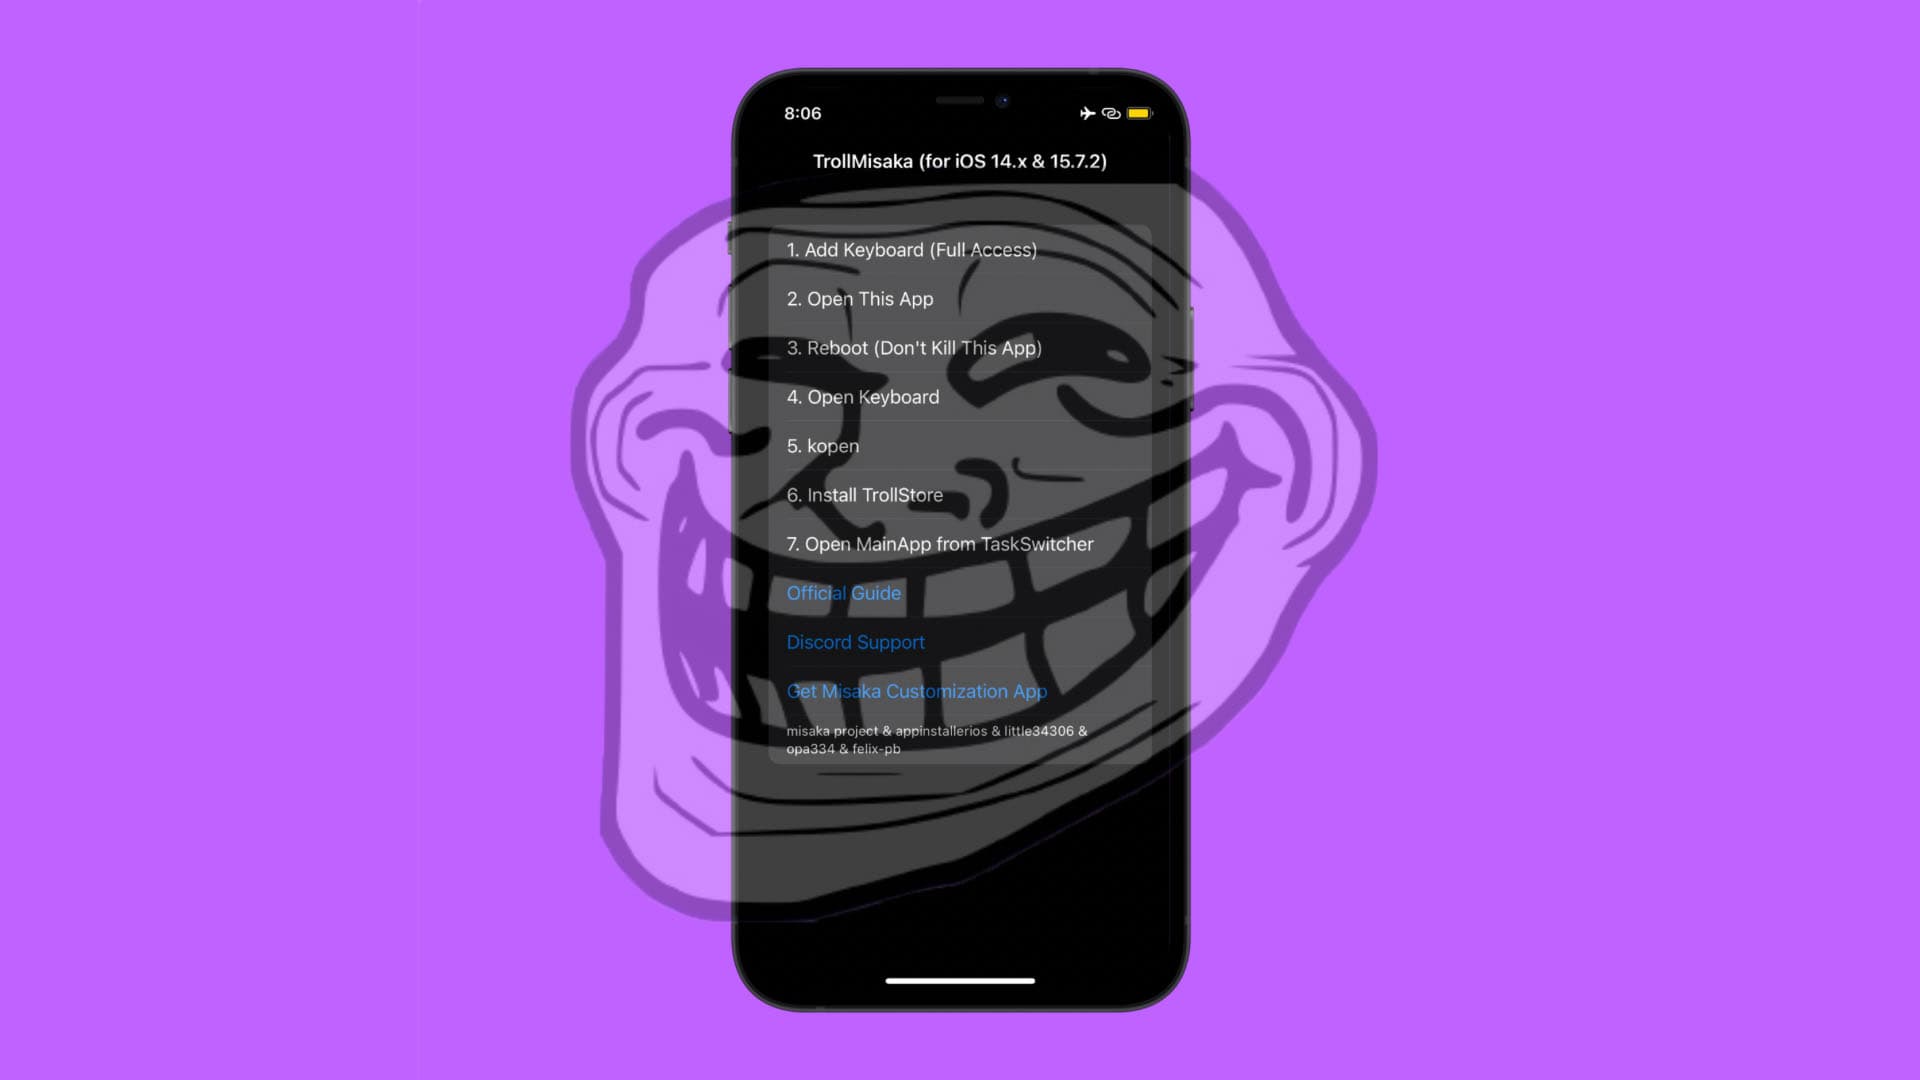 TrollMisaka can be used to install TrollStore on iOS 14.x-15.8.1 devices